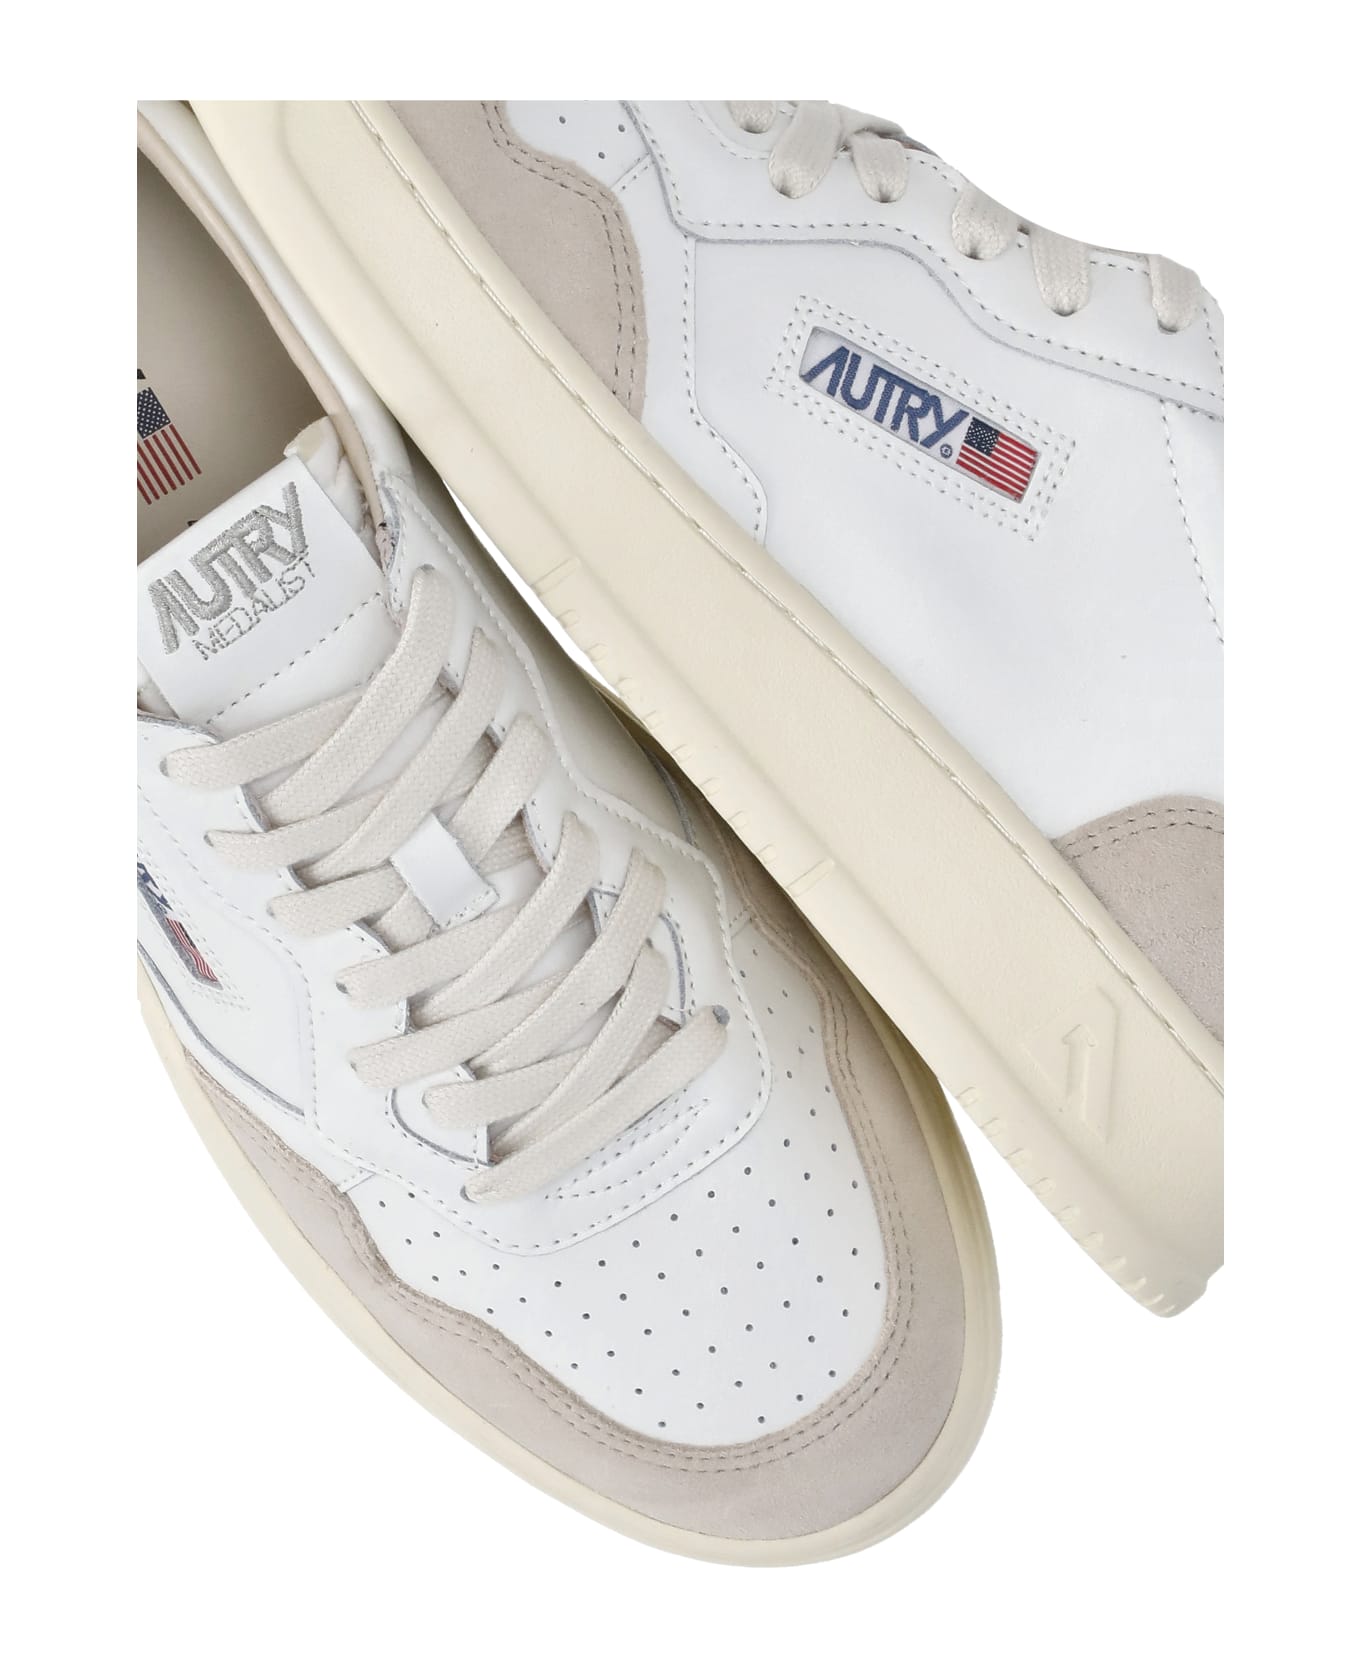 Autry Aulm Ls21 Sneakers - White